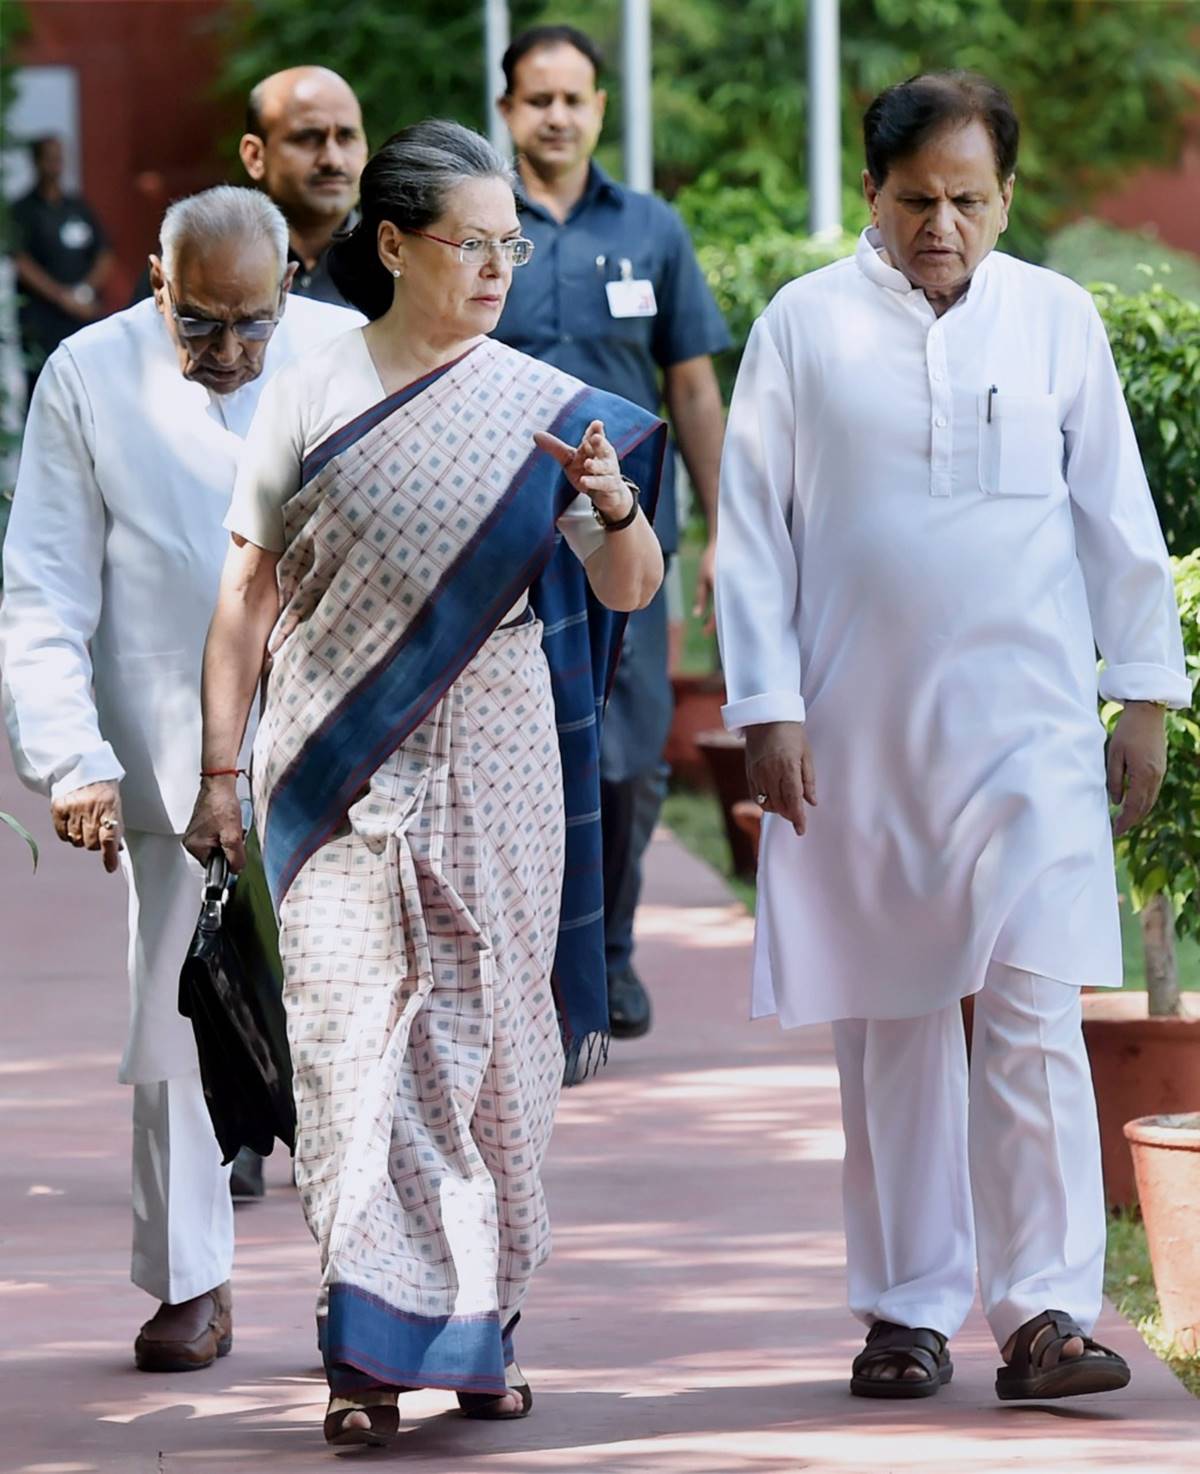 Ahmed Patel passes away, Ahmed Patel Covid-19, Sonia Gandhi on Ahmed Patel, Ahmed Patel dies, Congress on Ahmed Patel's demise, Coronavirus, Ahmed Patel death reactions, Ahmed Patel obituary, Indian express